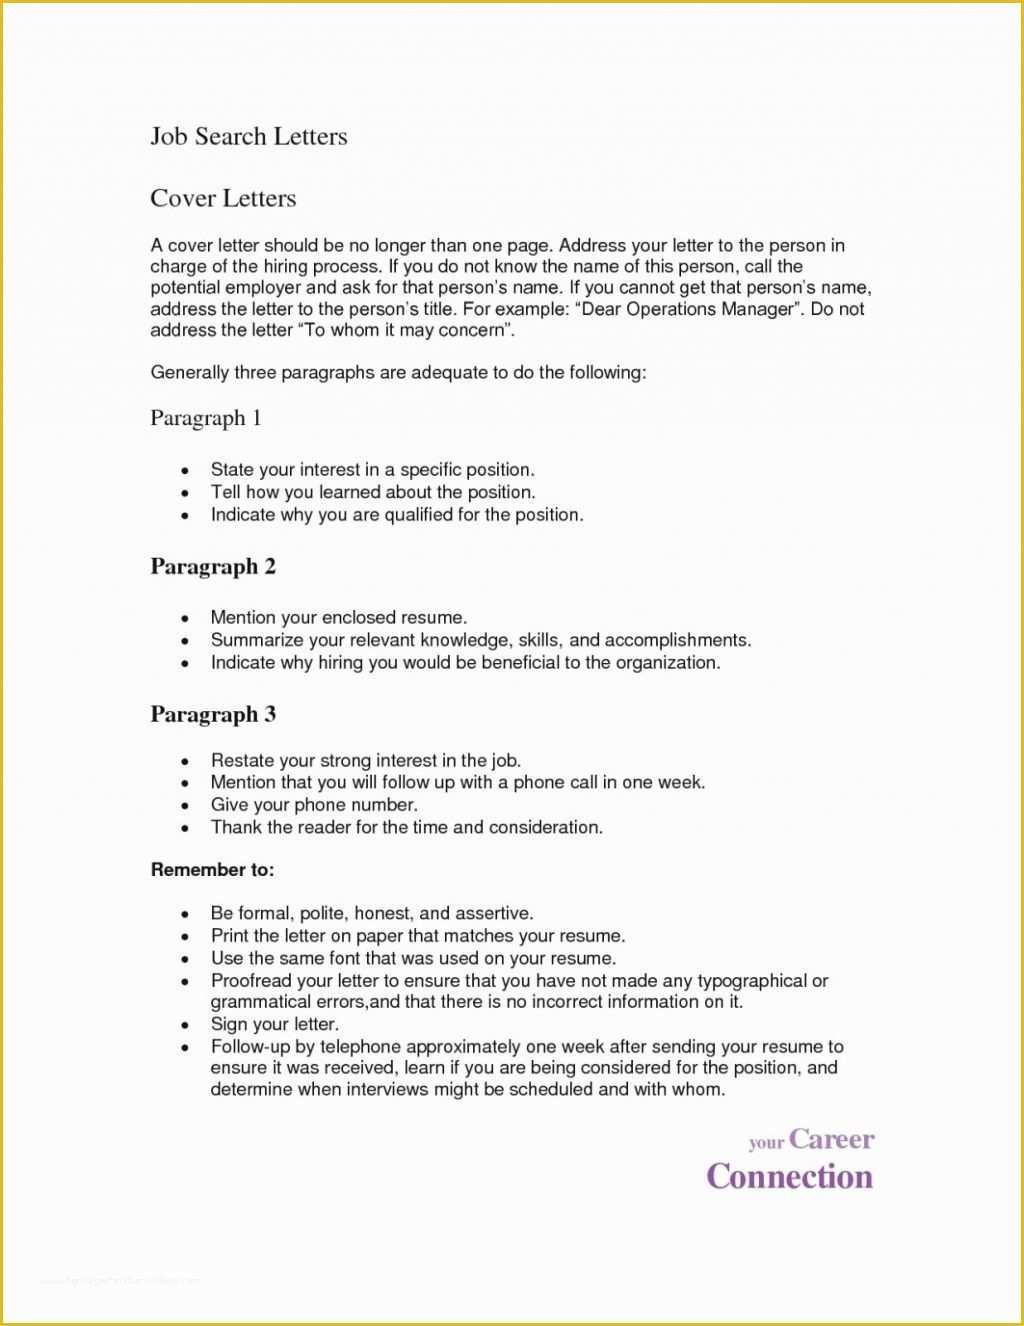 Free Matching Cover Letter and Resume Templates Of Matching Resume and Cover Letter Template Word Tag 54